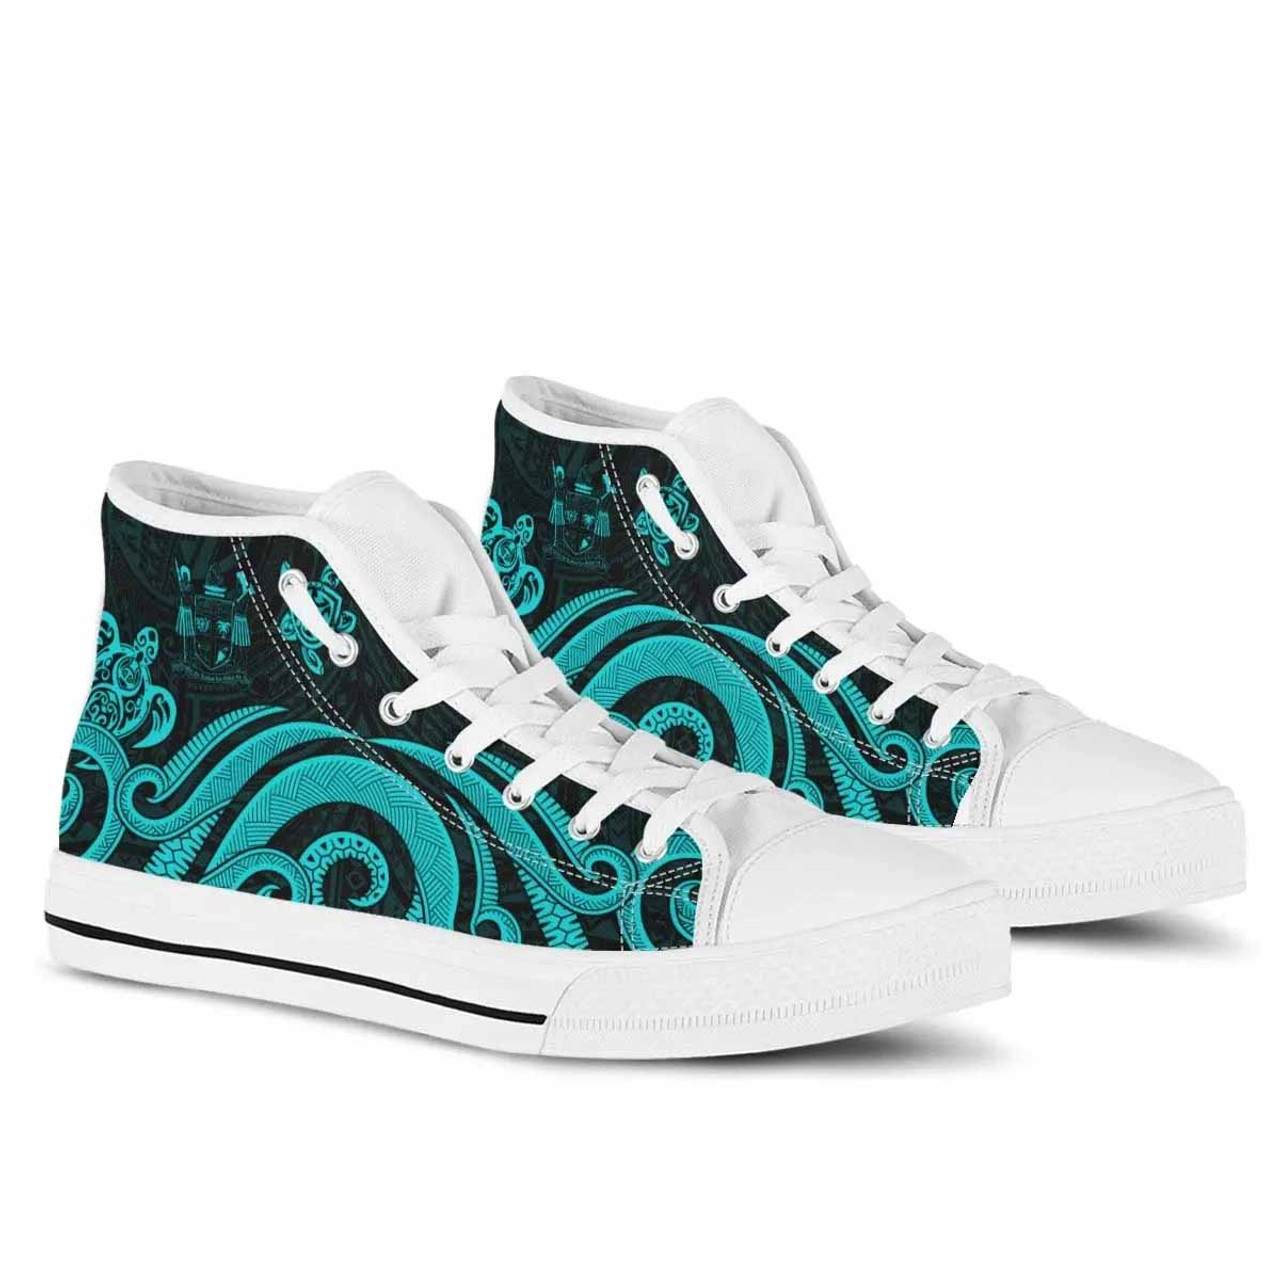 Fiji High Top Shoes - Turquoise Tentacle Turtle Crest 6